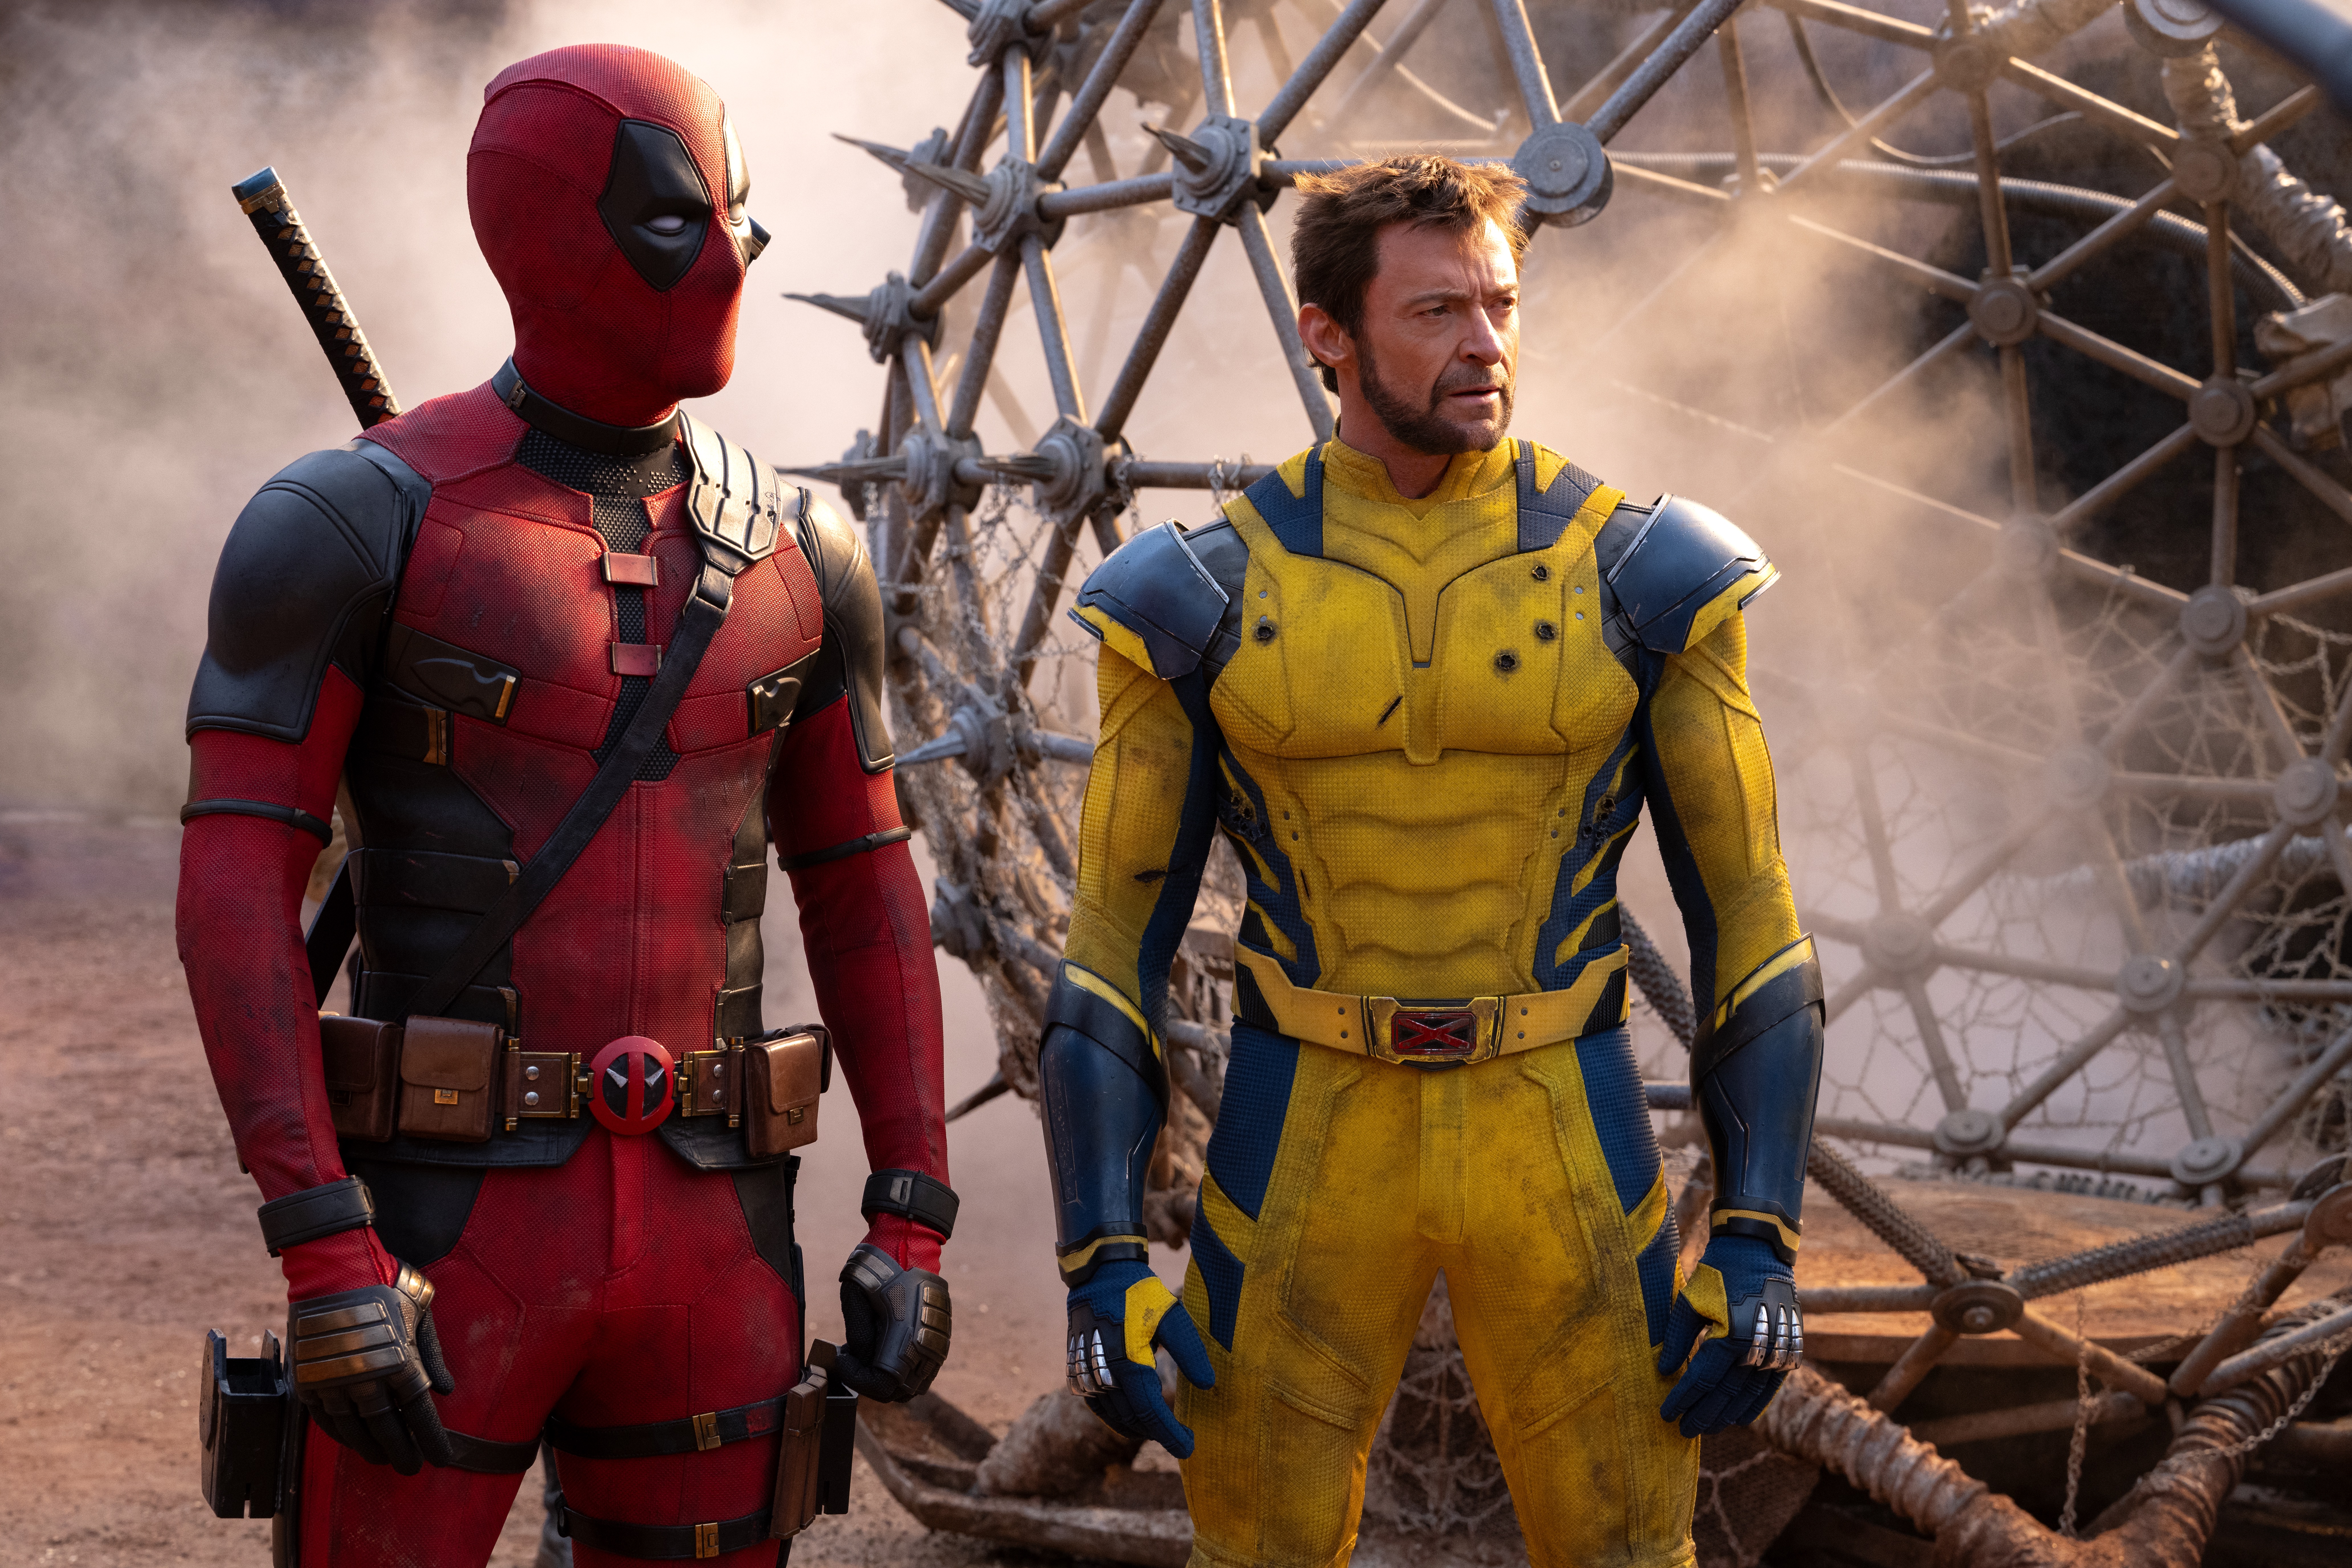 On May 20, Marvel Studios released a new teaser for its upcoming film Deadpool & Wolverine, where Ryan Reynolds (Deadpool) and Hugh Jackman (Wolverine) return to their iconic antihero roles.